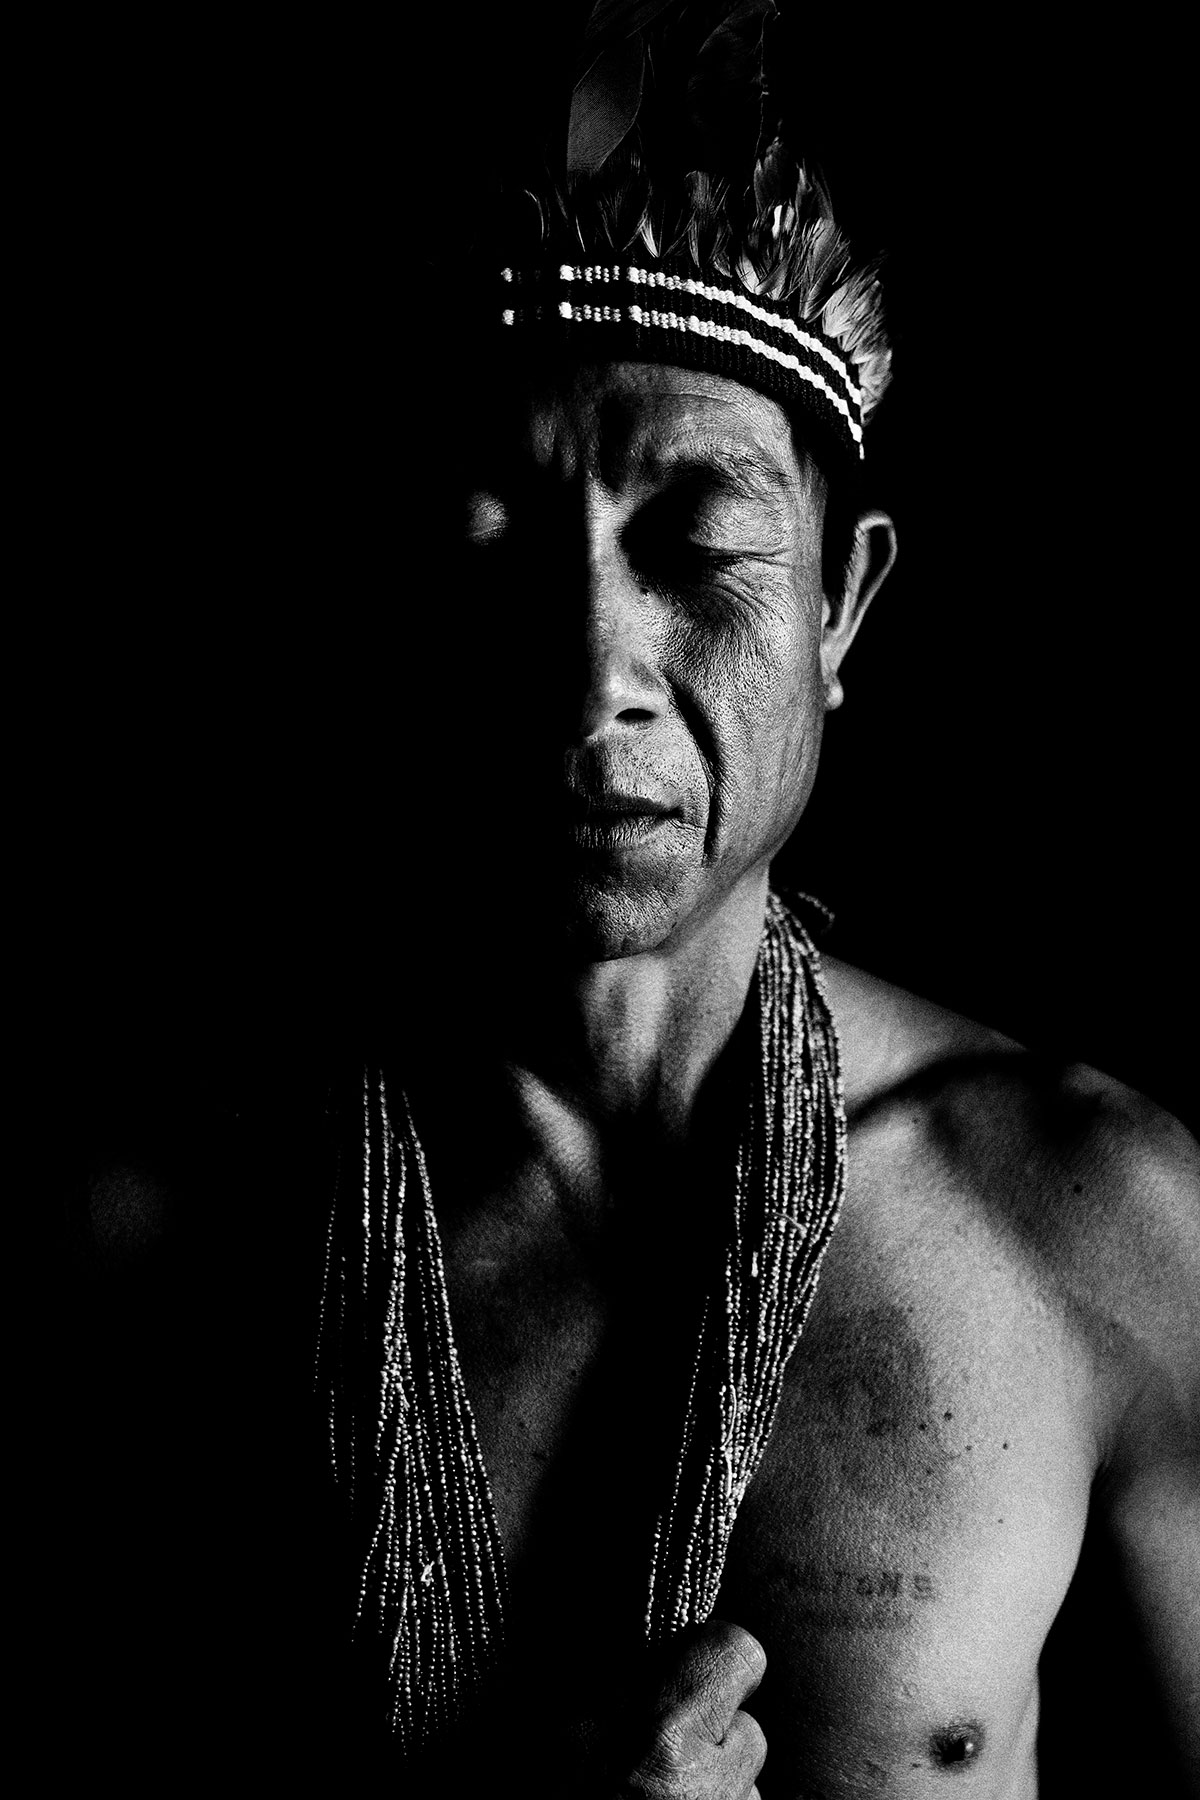 Eyes Closed Portrait of a Guajajara: Black and White Portrait Photography by Jean Tran and Élysée Lang